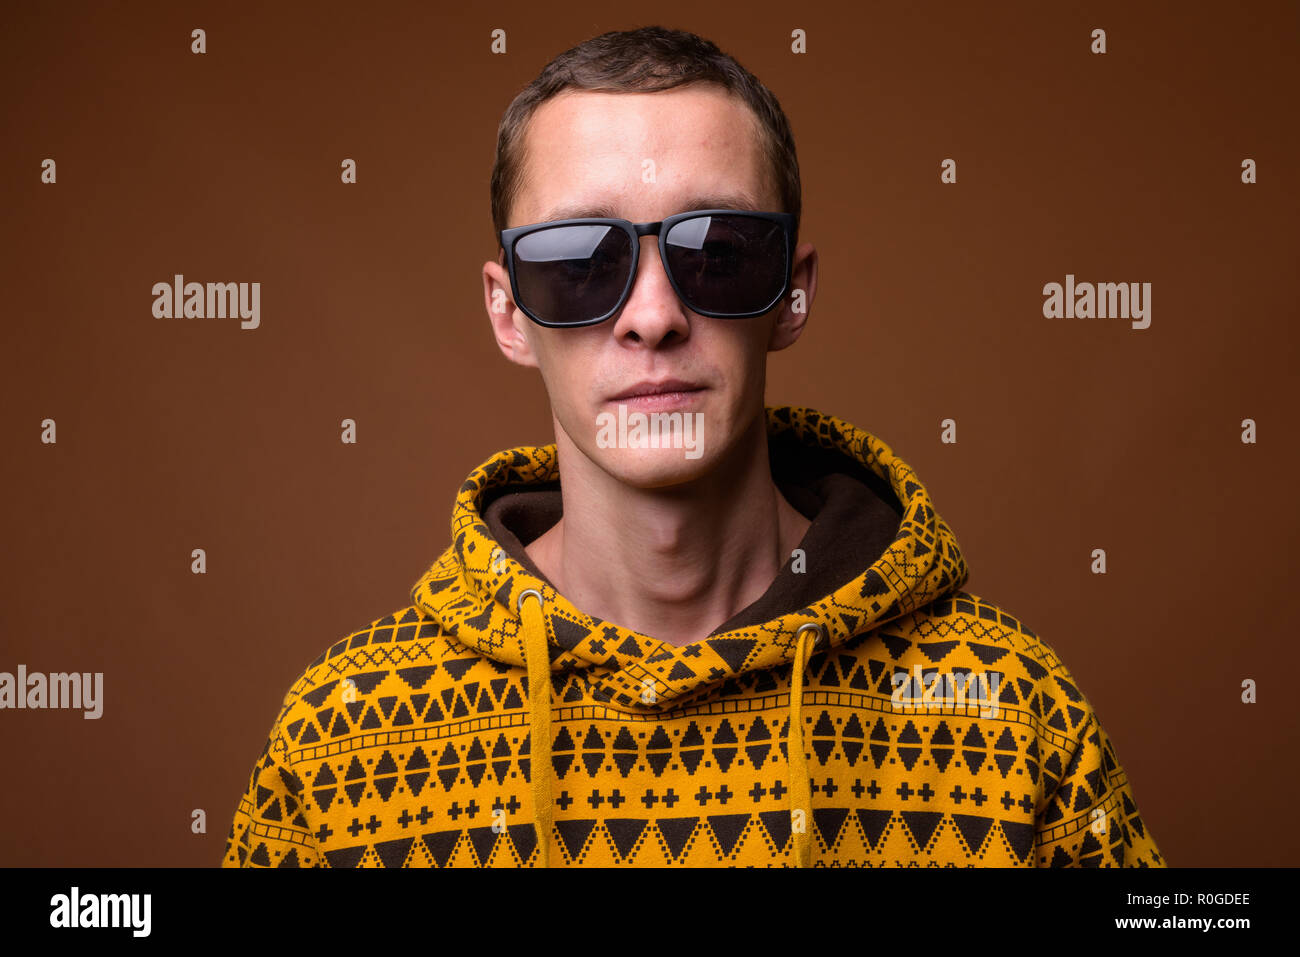 Studio shot of young man against brown background Stock Photo